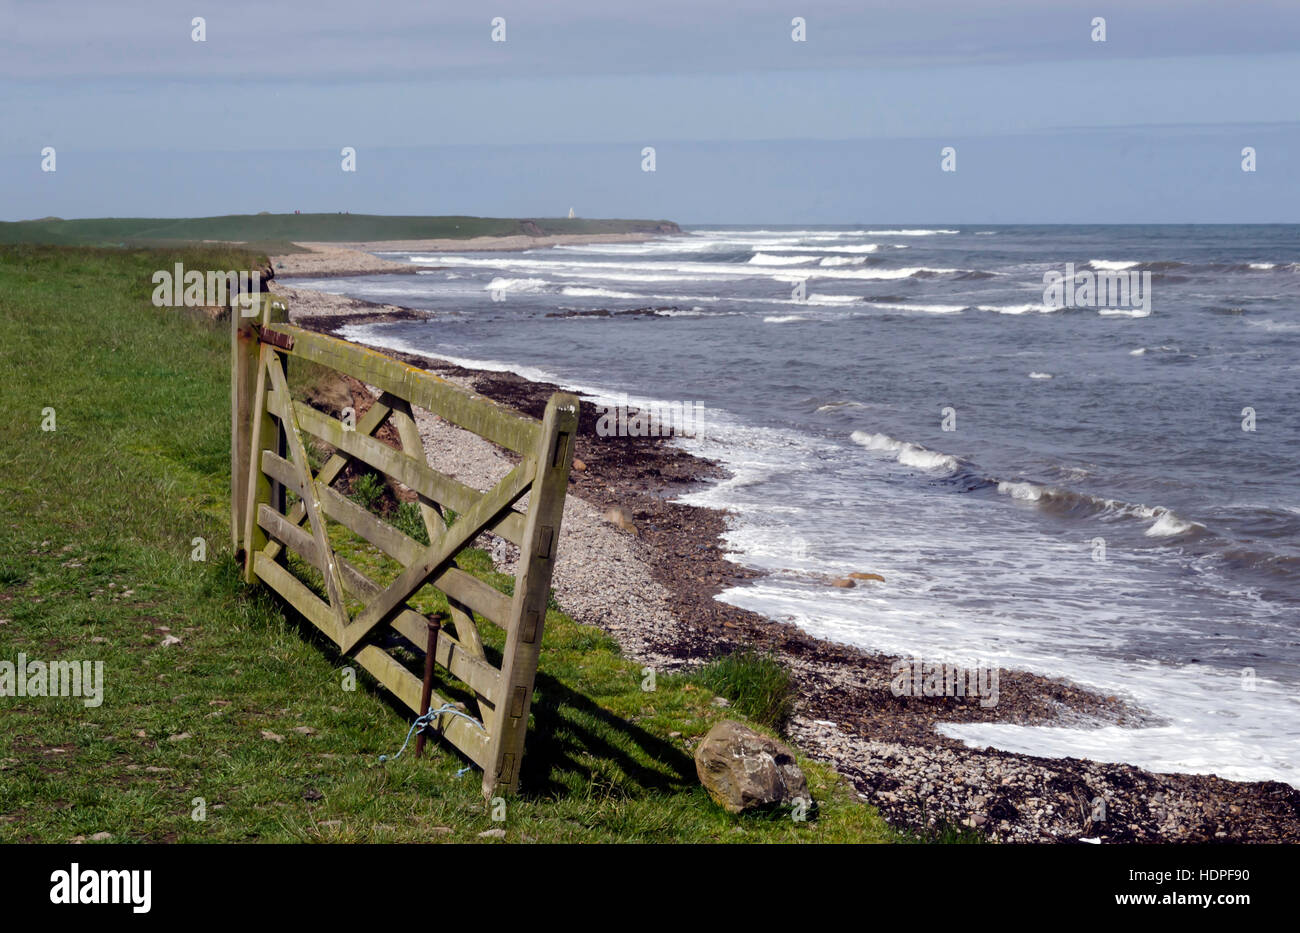 Rough sea off the coast of Lindisfarne (Holy Island) in Northumberland, England, with an old wooden gate in the foreground. Stock Photo